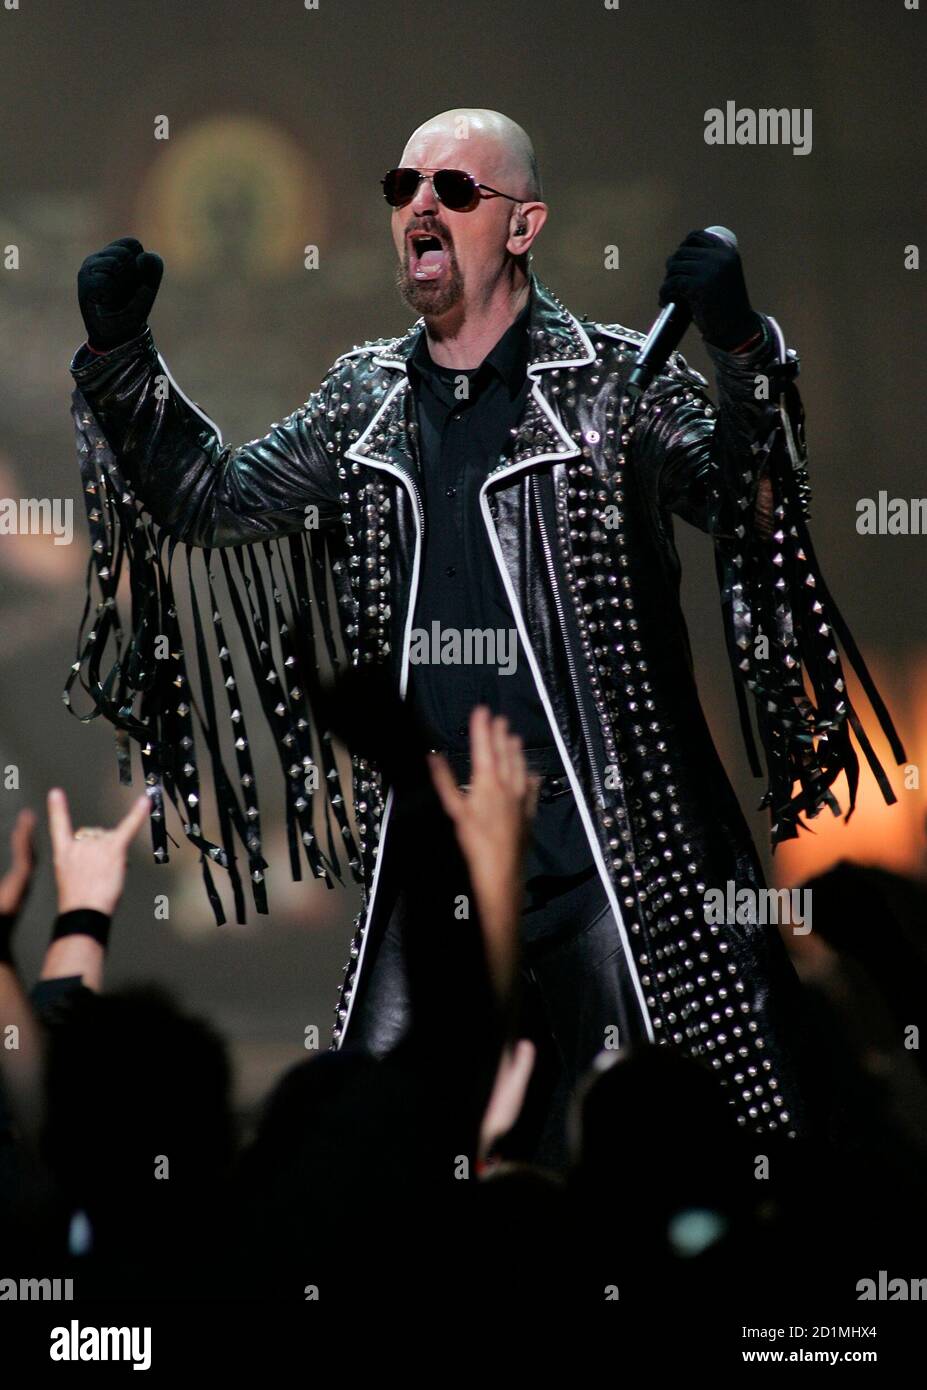 Judas Priest singer Rob Halford performs during the VH1 Rock Honors concert at the Mandalay Bay Events Center in Las Vegas, Nevada May 25, 2006. The show, honoring the legends of hard rock, will be broadcast May 31 on the VH1 network. [The tribute show celebrates the music and influence of Queen, Def Leppard, Judas Priest and KISS.] Stock Photo